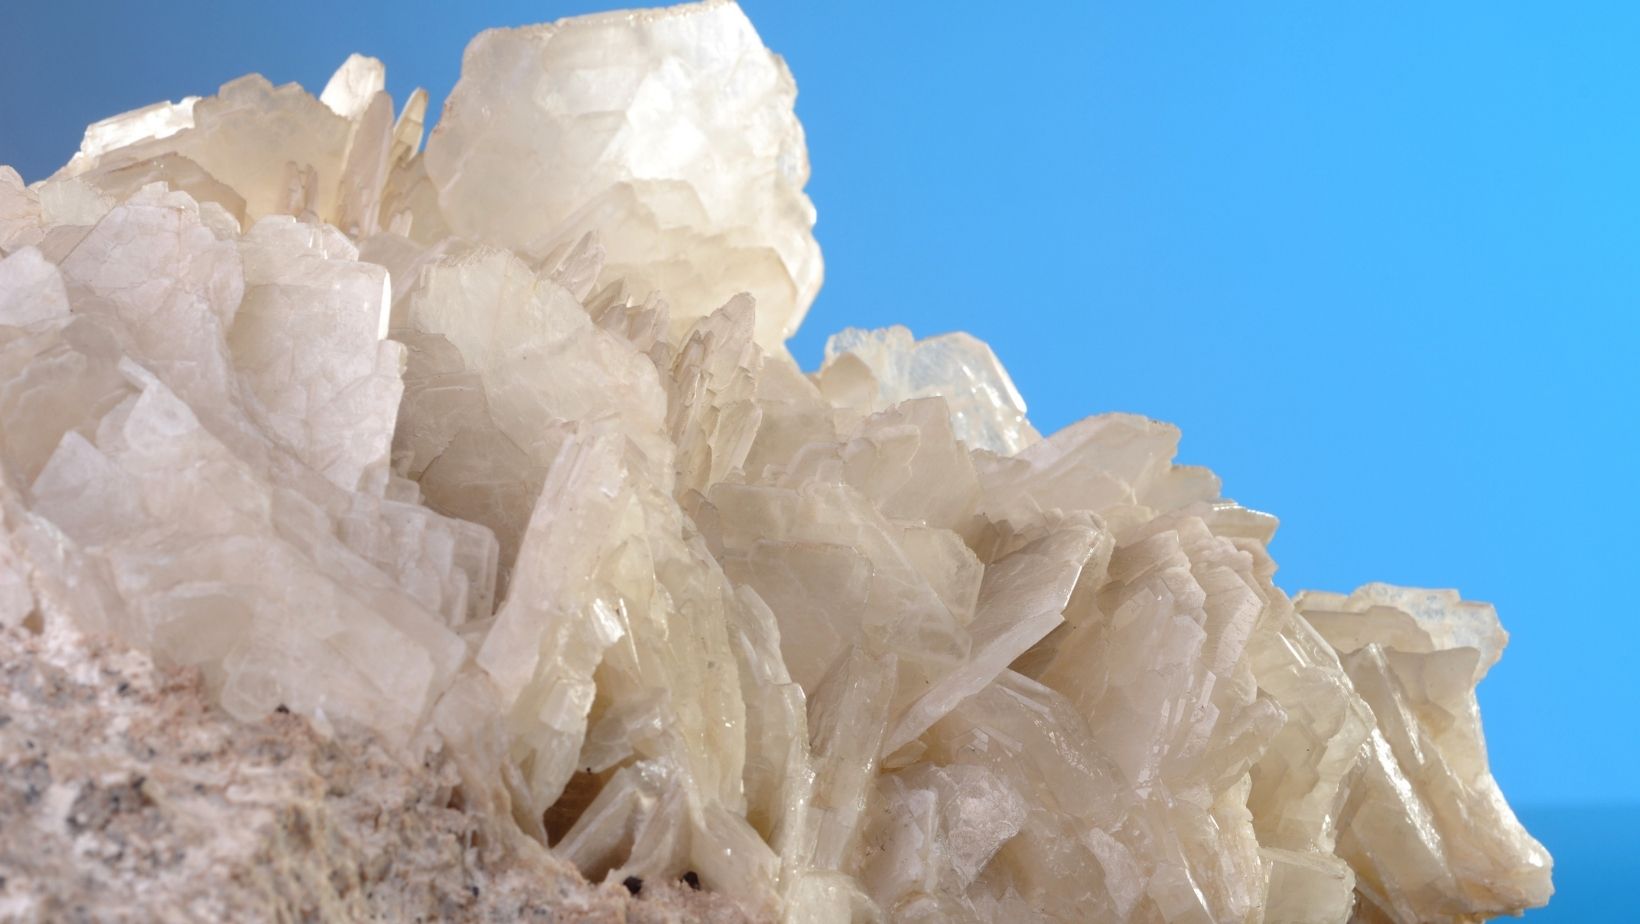 Know Your Crystal: How to Buy and Use Quartz Crystals for Business Success